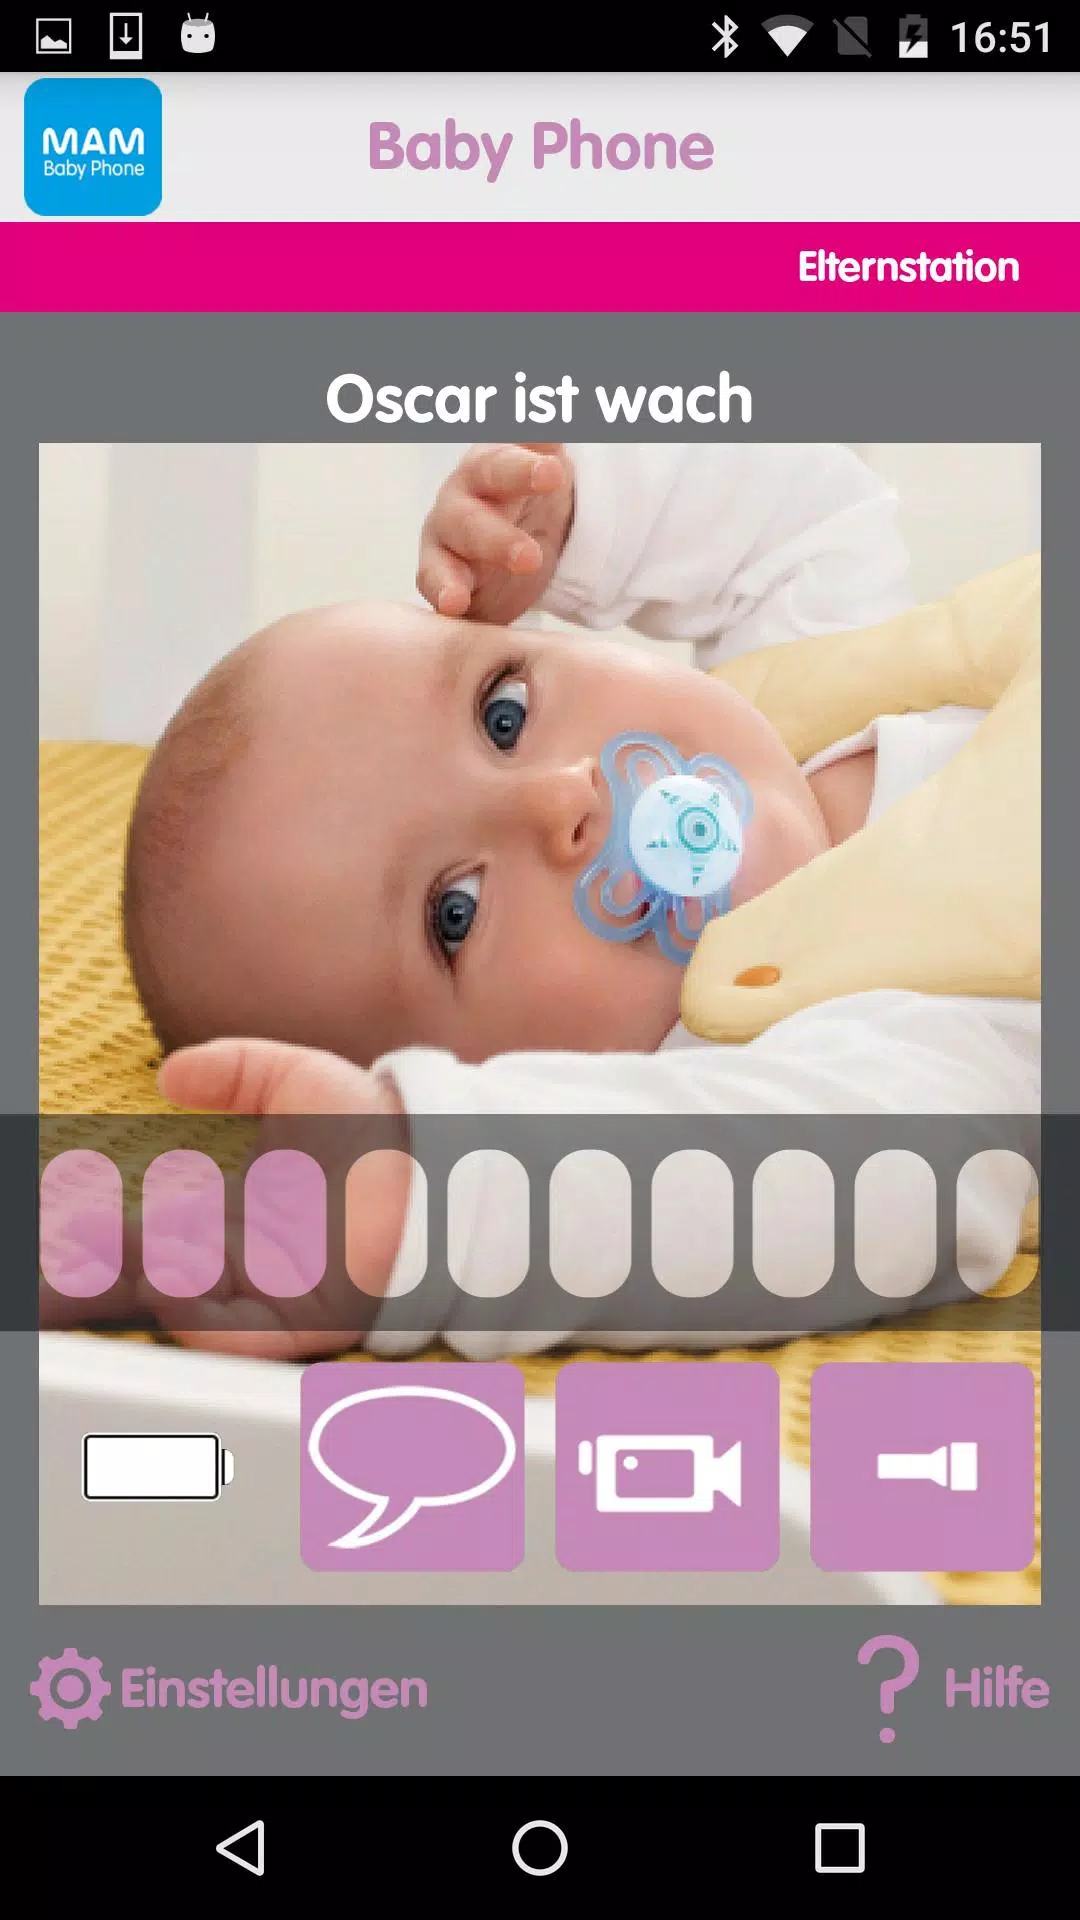 MAM Baby Phone for Android - APK Download